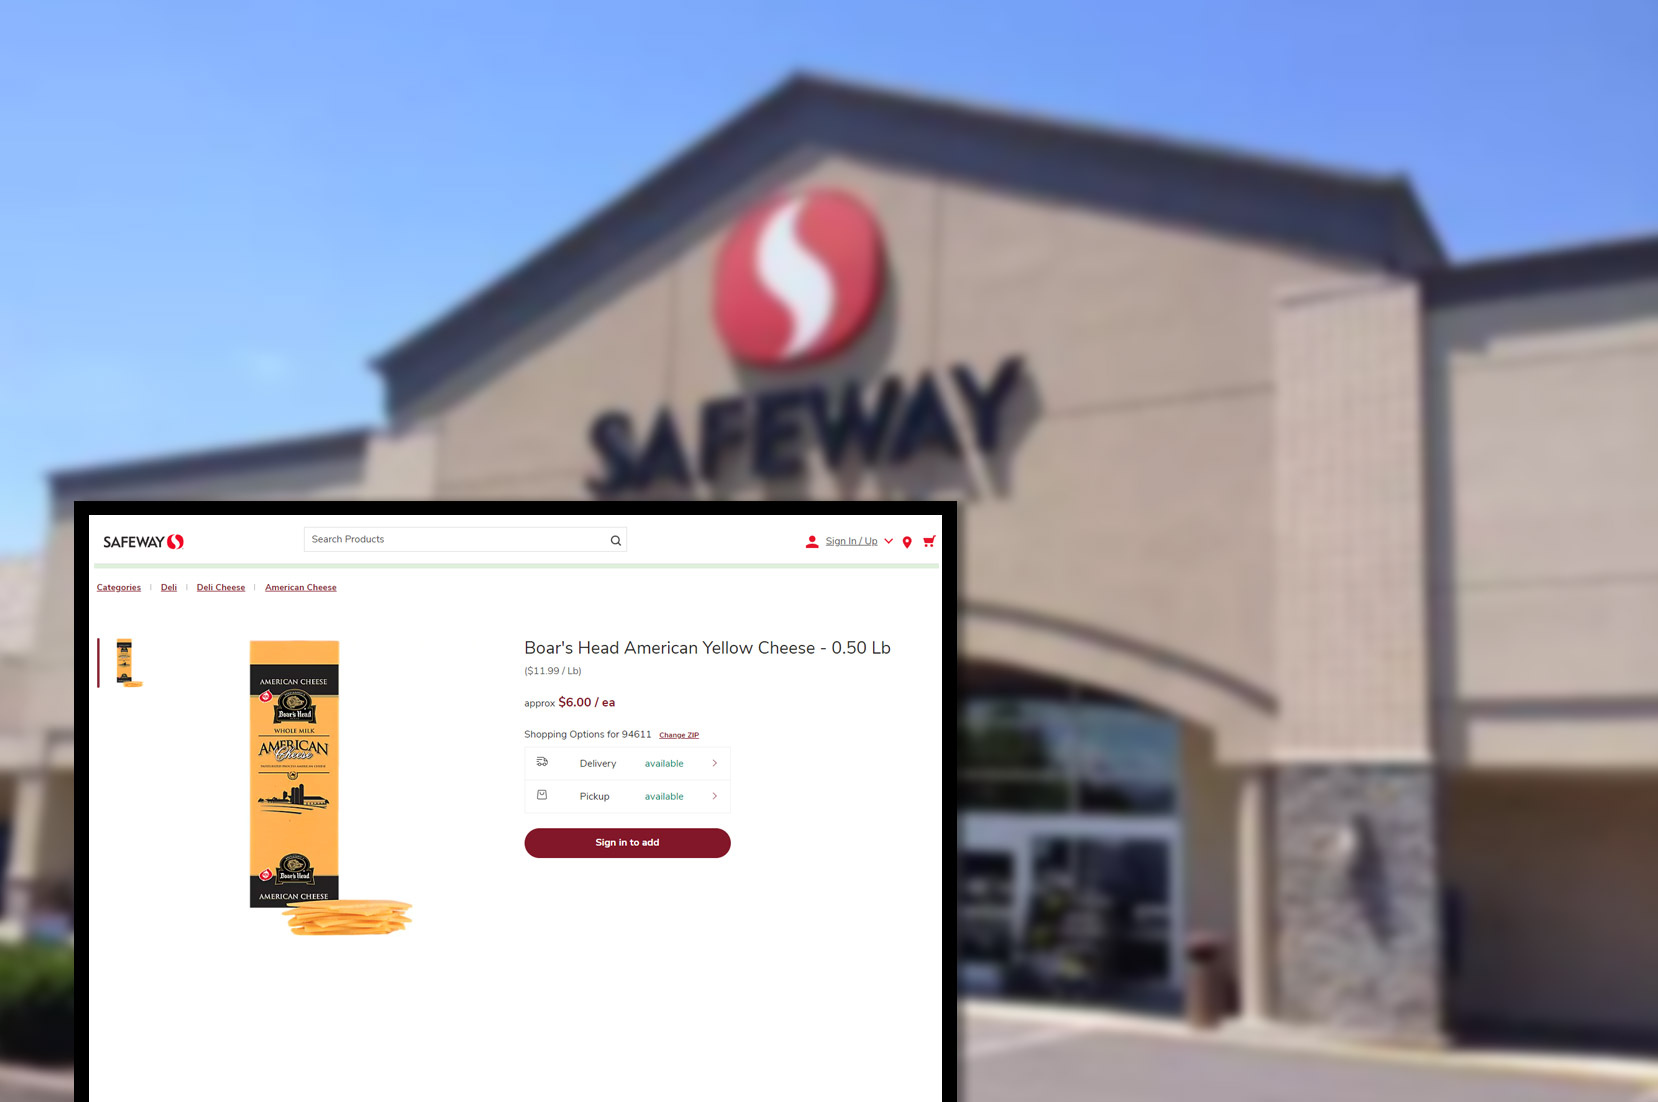 safeway-comproduct-pricing-information-and-image-scraping-services